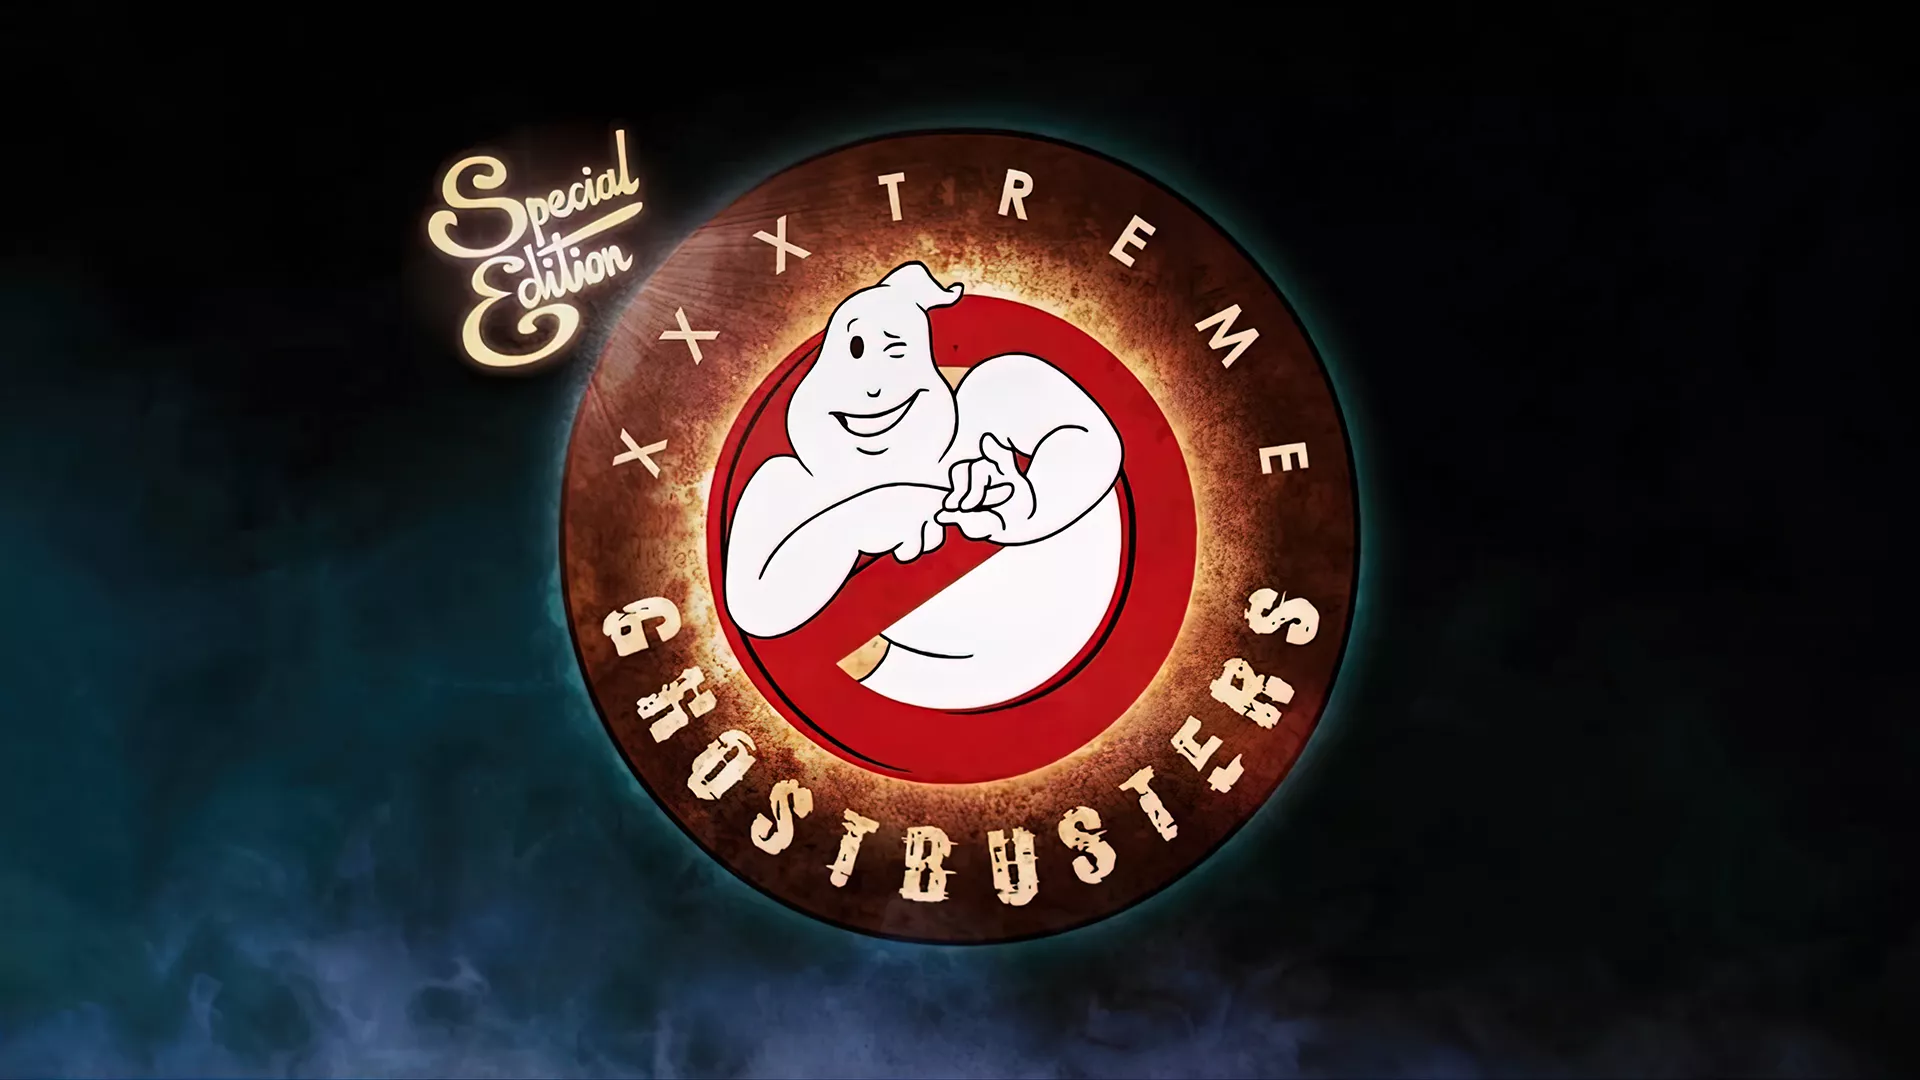 xxxtreme ghostbusters deluxe edition